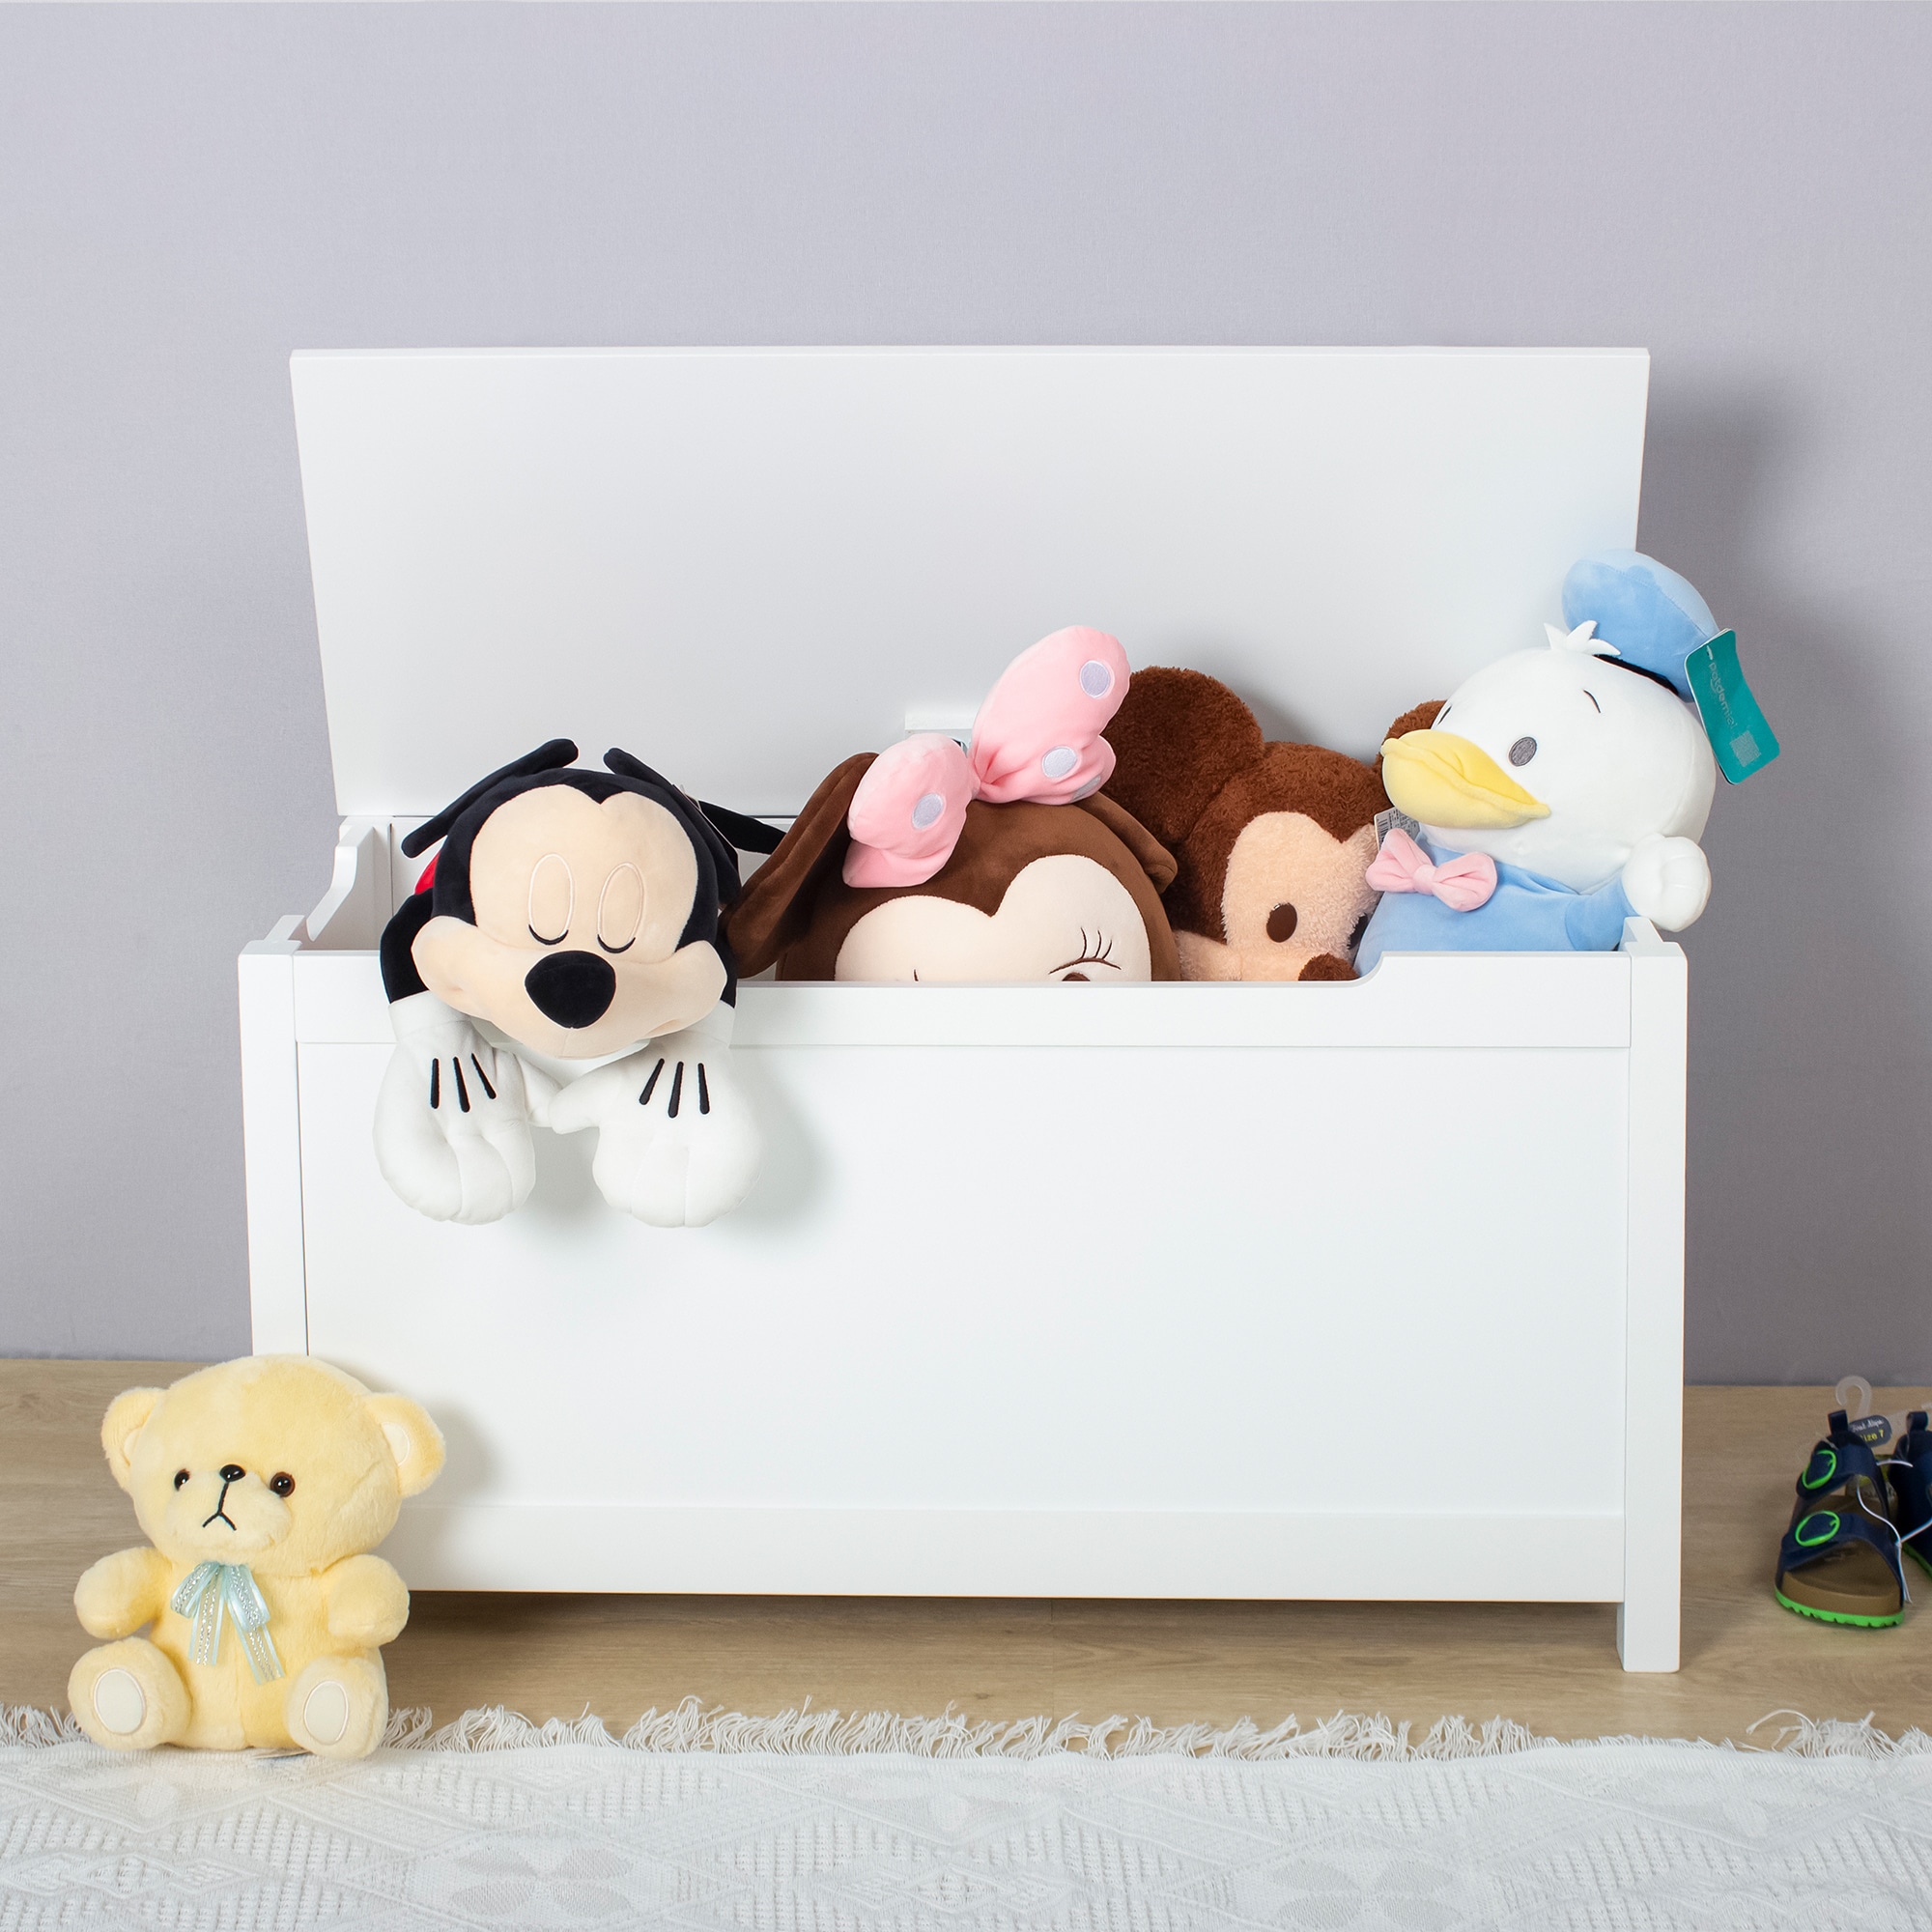 Gzmr Contemporary White Wooden Toy Box